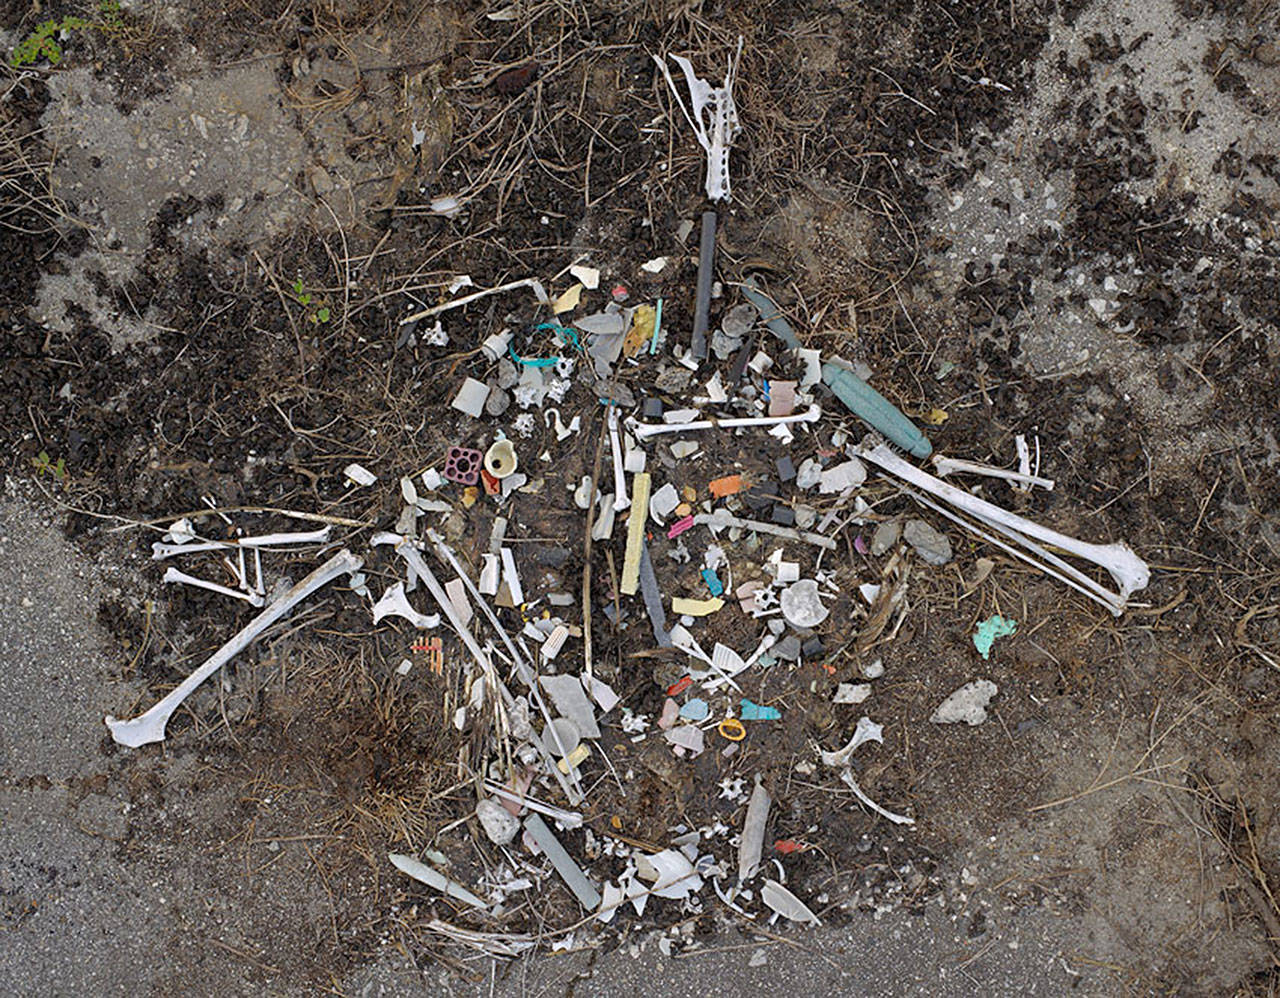 As the birds’ feathers and bones decay, small piles of garbage leave an outline of life and death. (Photo provided by Chris Jordan)